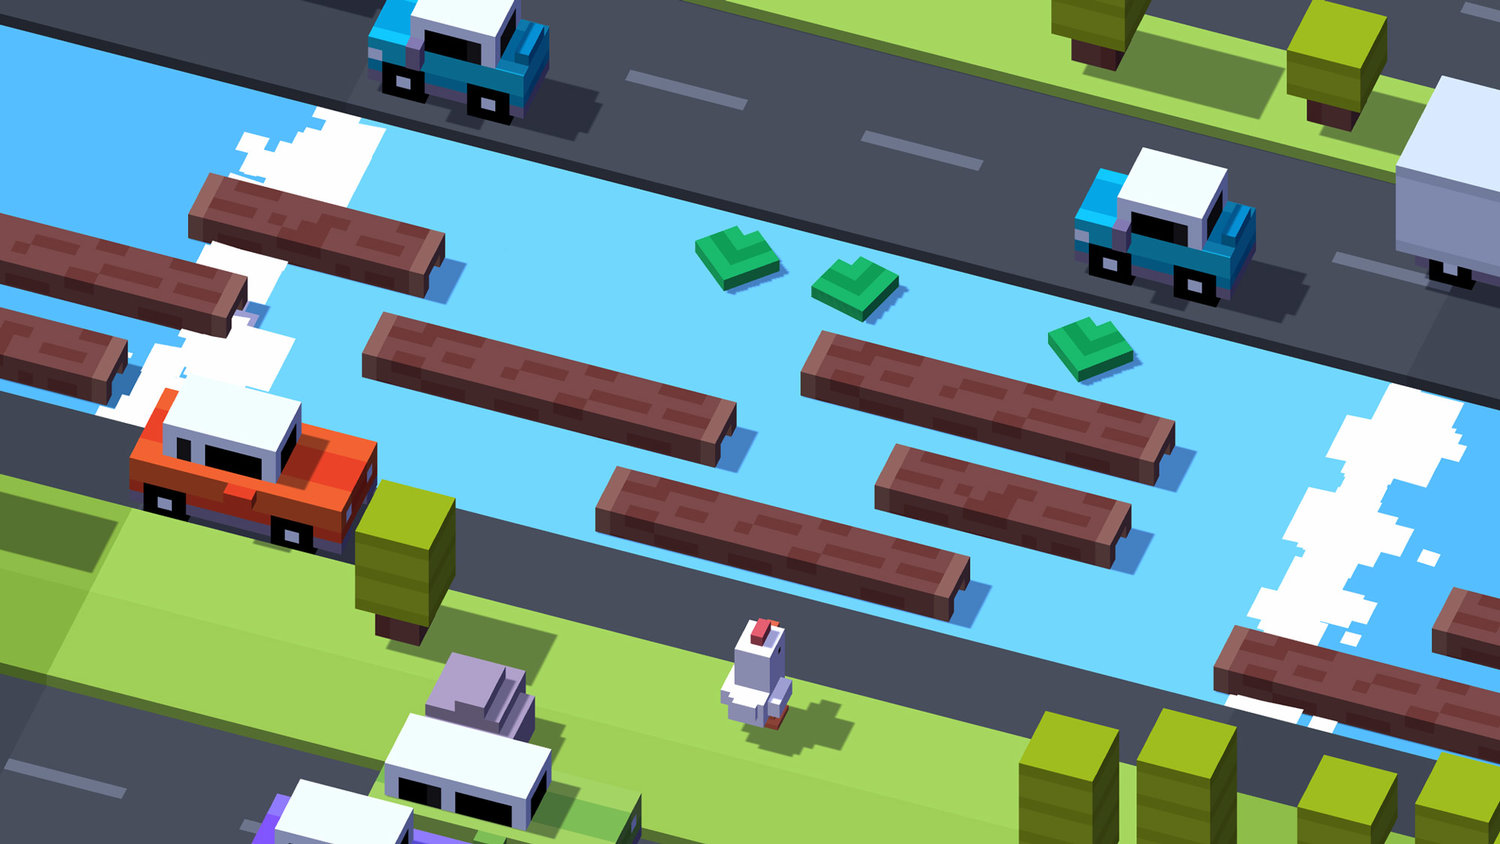 crossy road multiplayer not working android